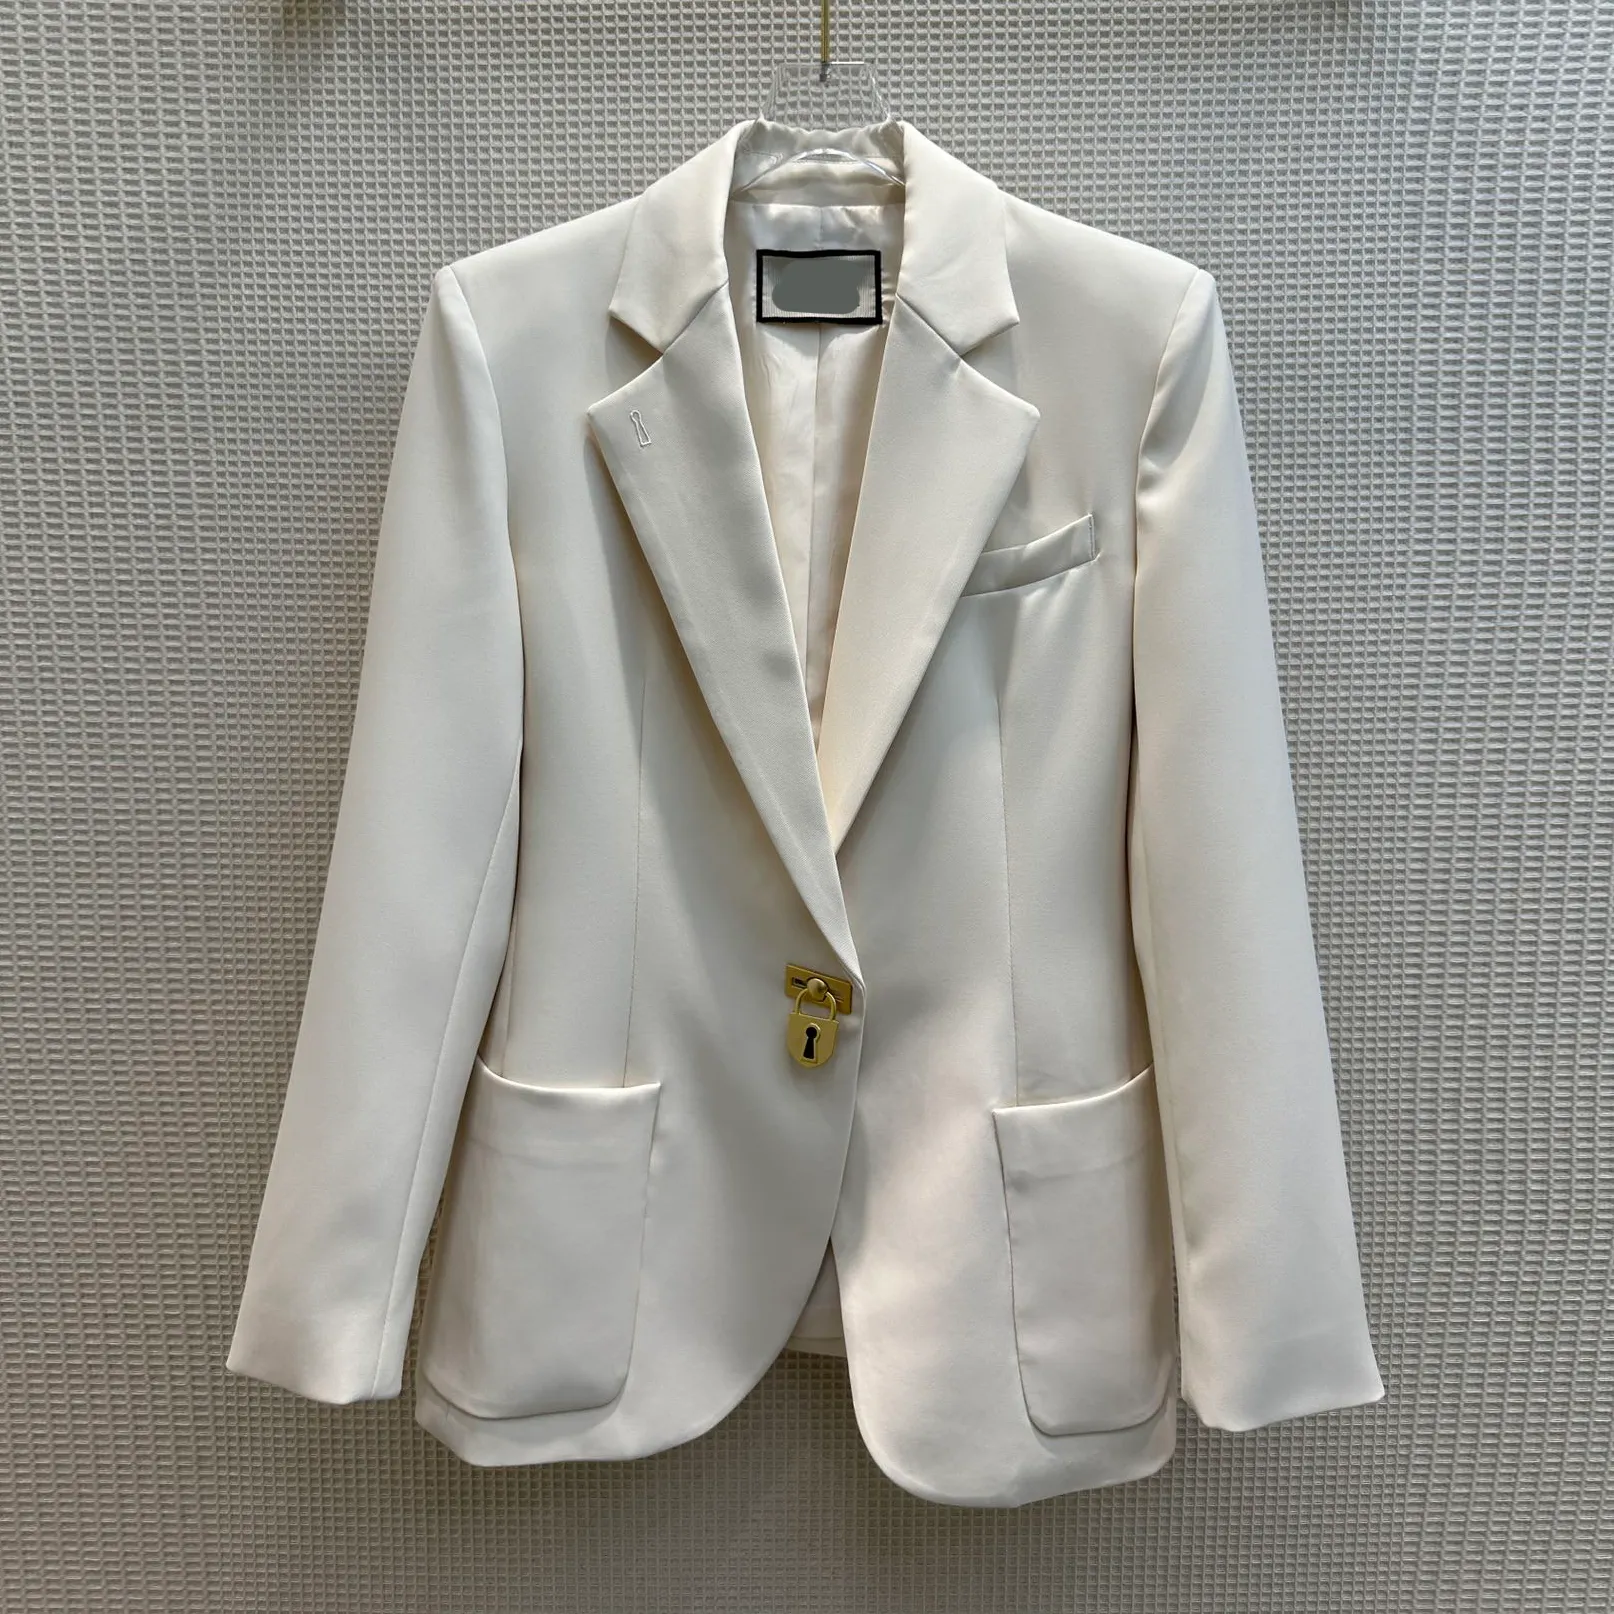 European fashion brand Polo collar long sleeved gold buckle decoration suit jacket